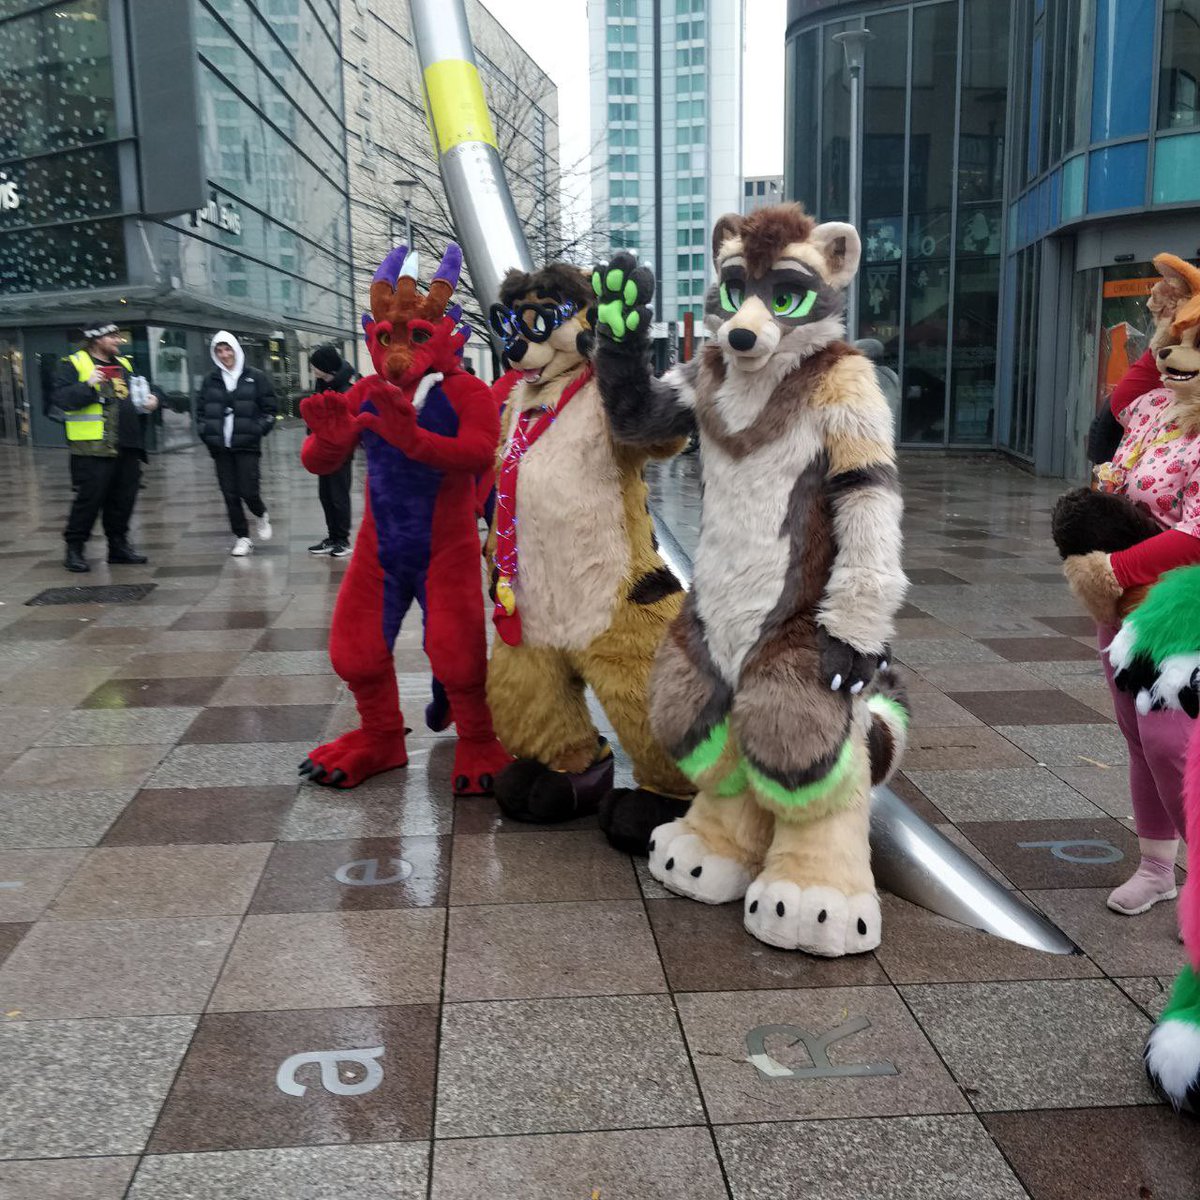 Some photos from today @FurTMCardiff. Thanks to all the staff and especially @CCDinoFursuits for all their hard work. It was a day I’ll never forget. #fursuiter #fursuit #furryfandom